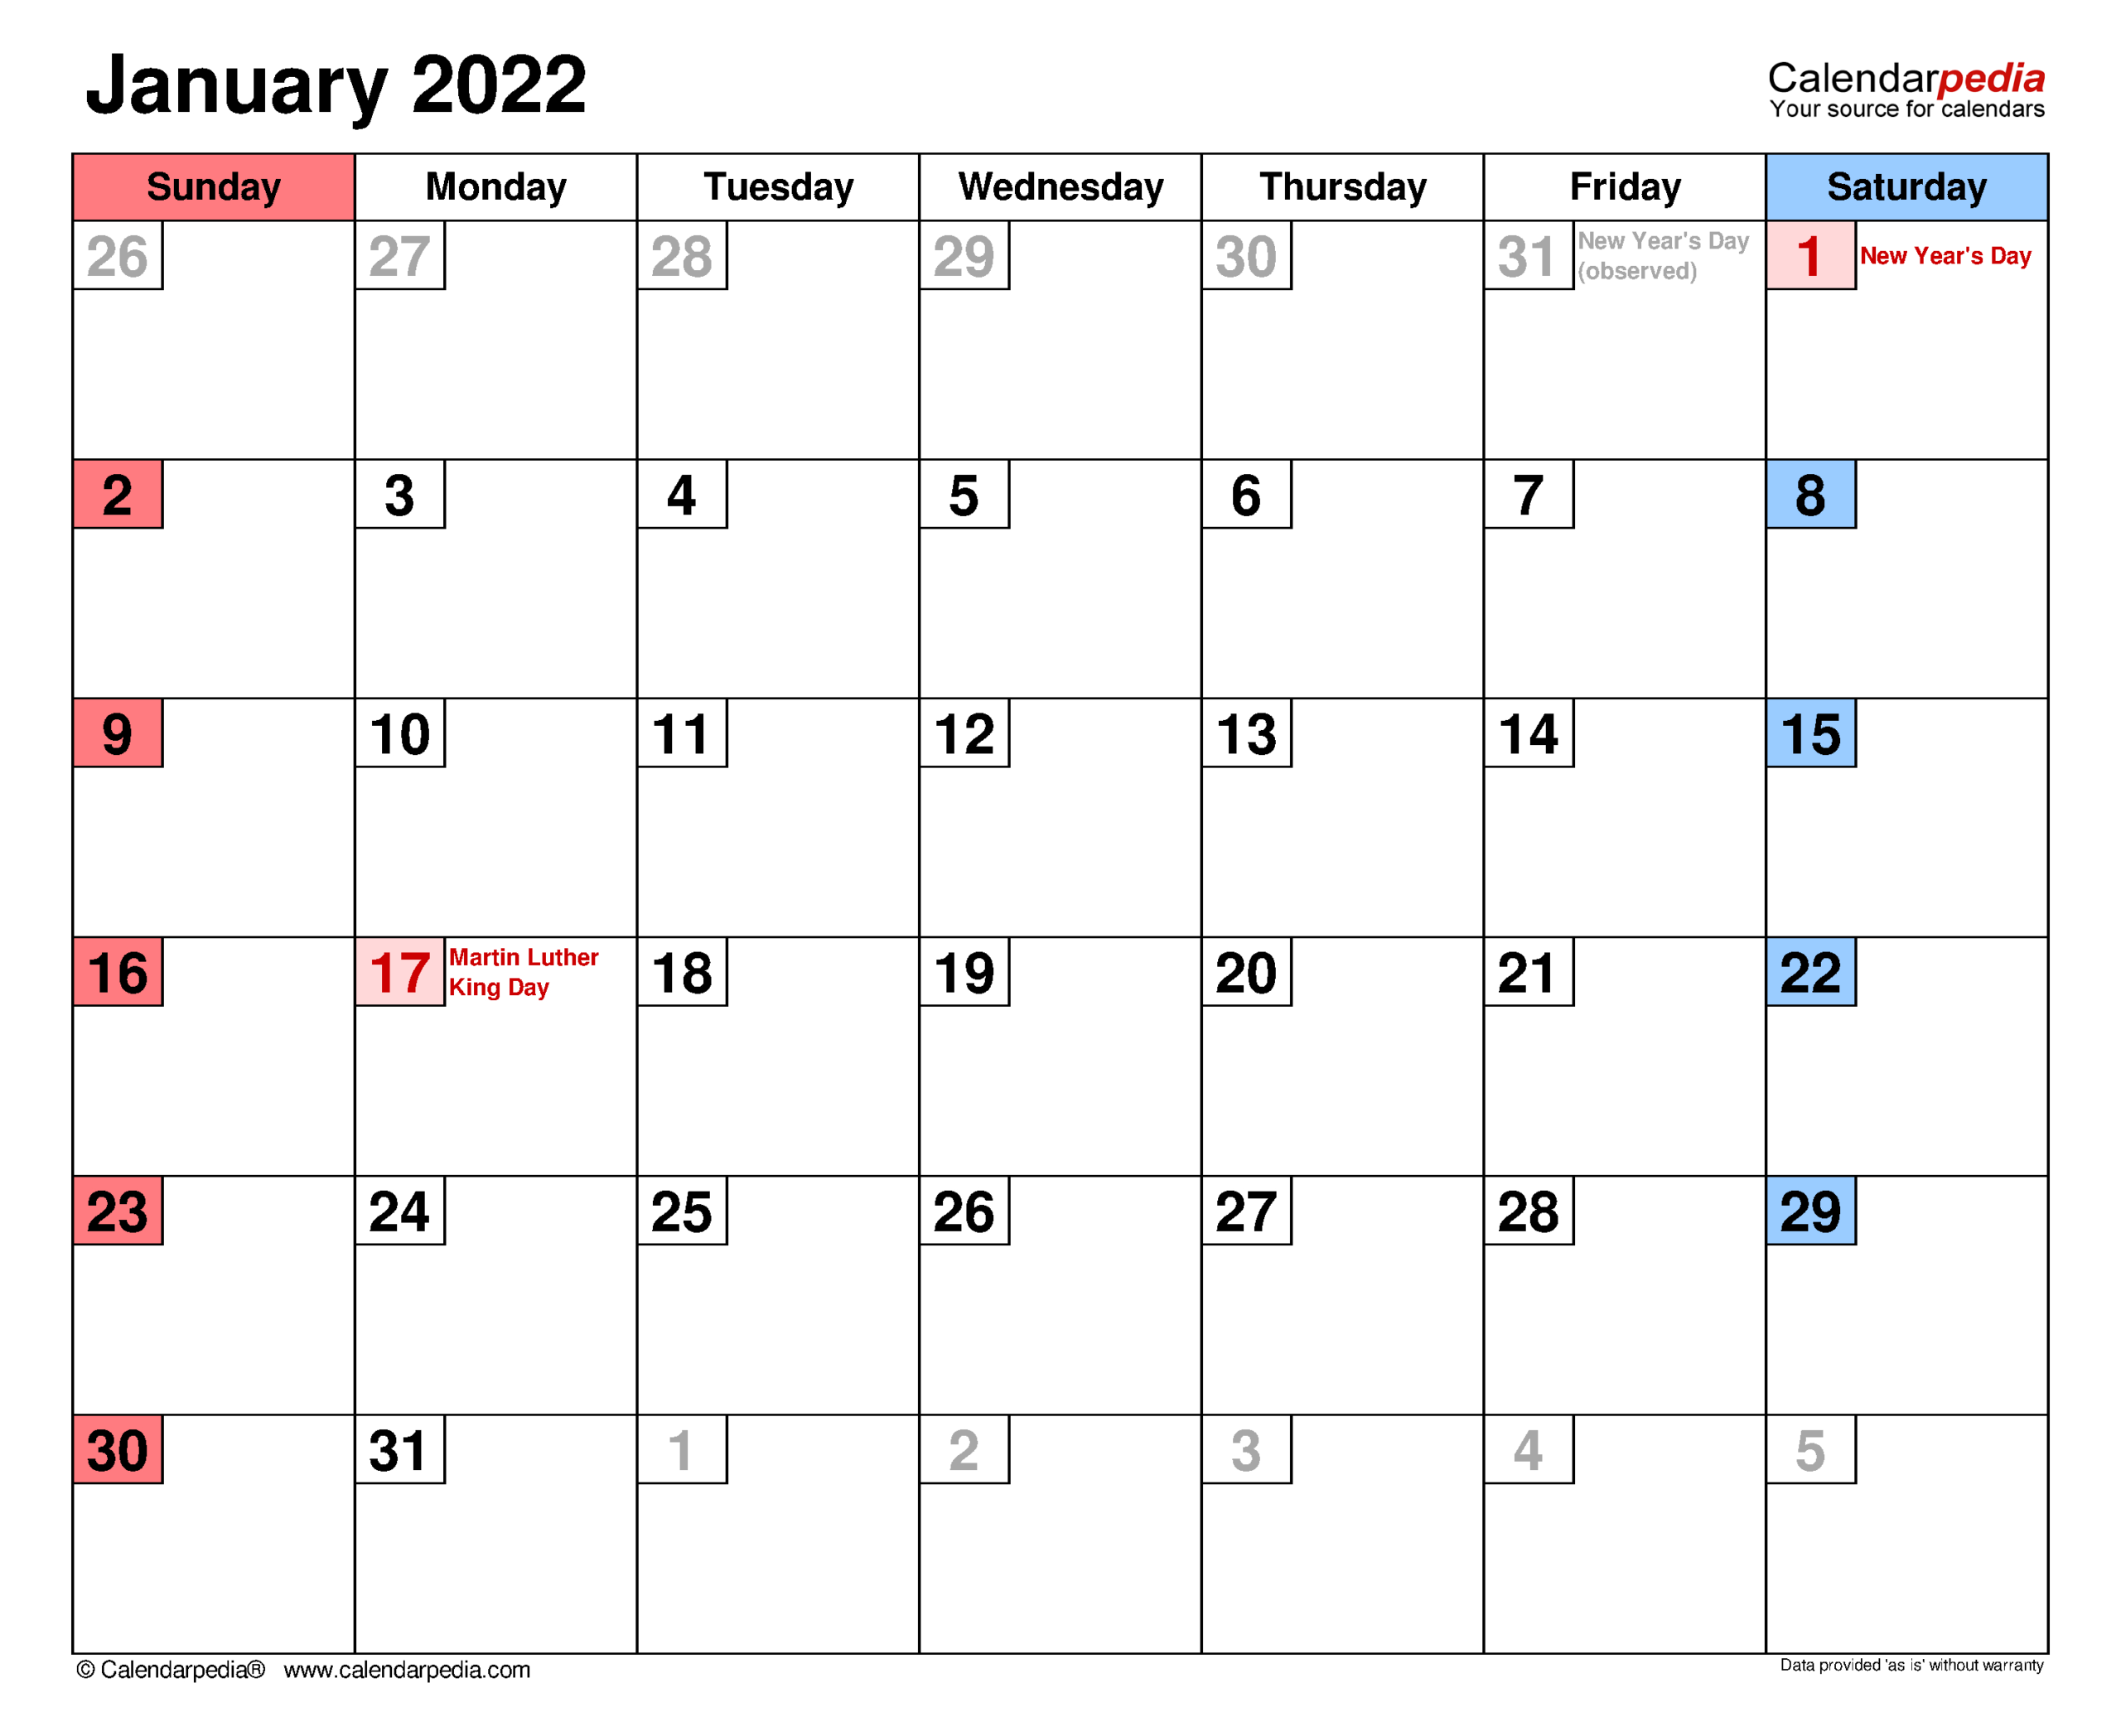 January 2022 Calendar | Templates For Word, Excel And Pdf  Astronomy Picture Of The Day Calendar December 2022